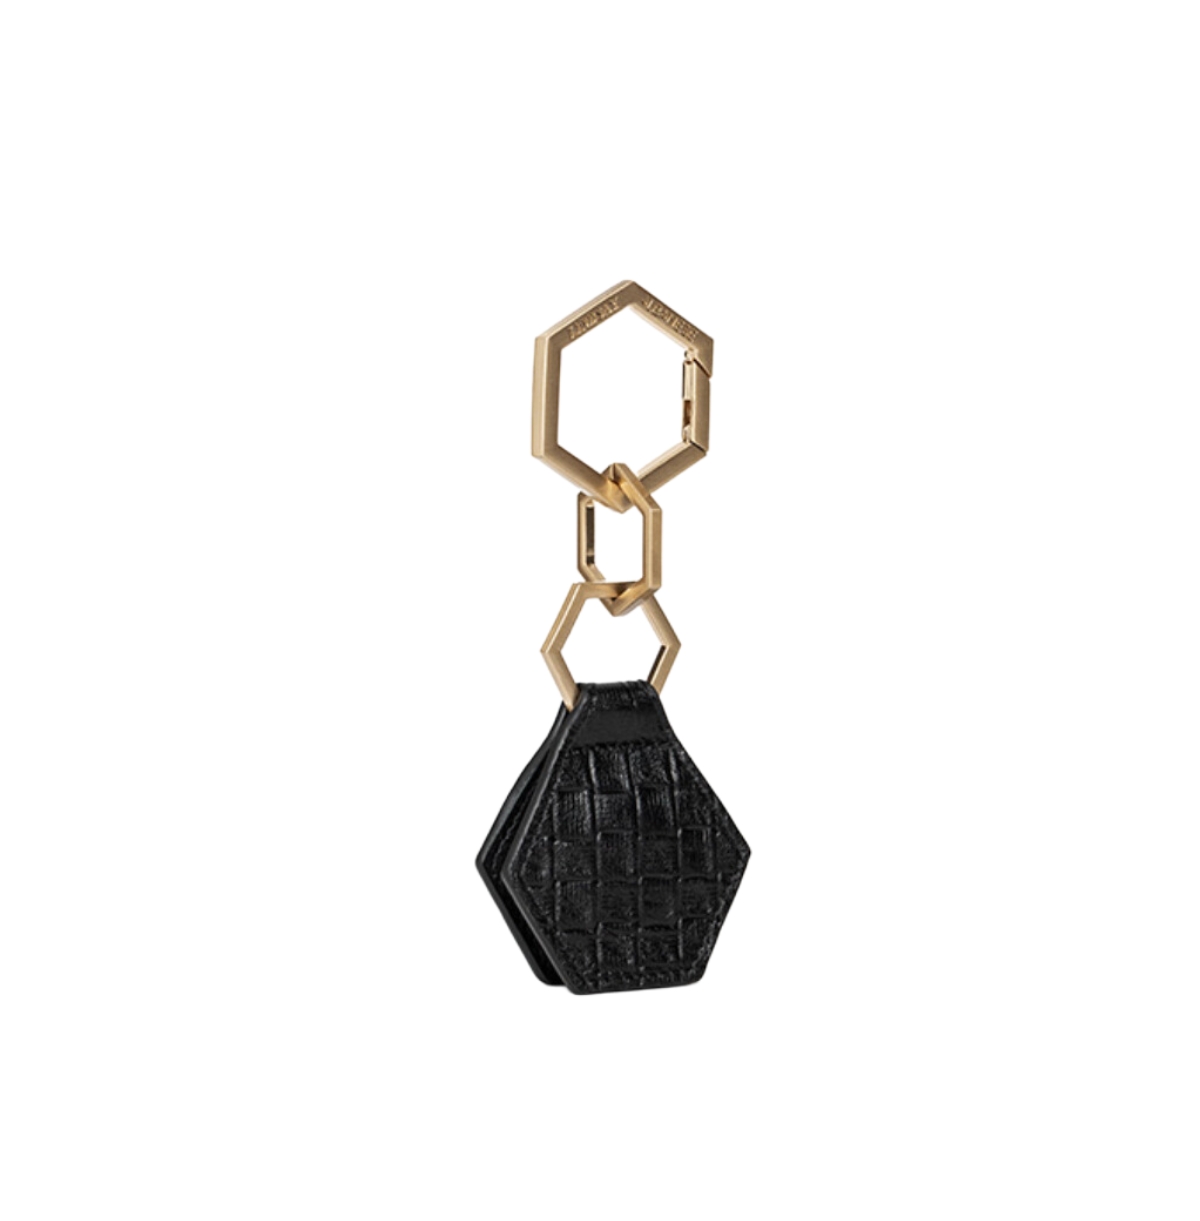 The Hex Toptote Hat Clip - Black with brushed gold hardware